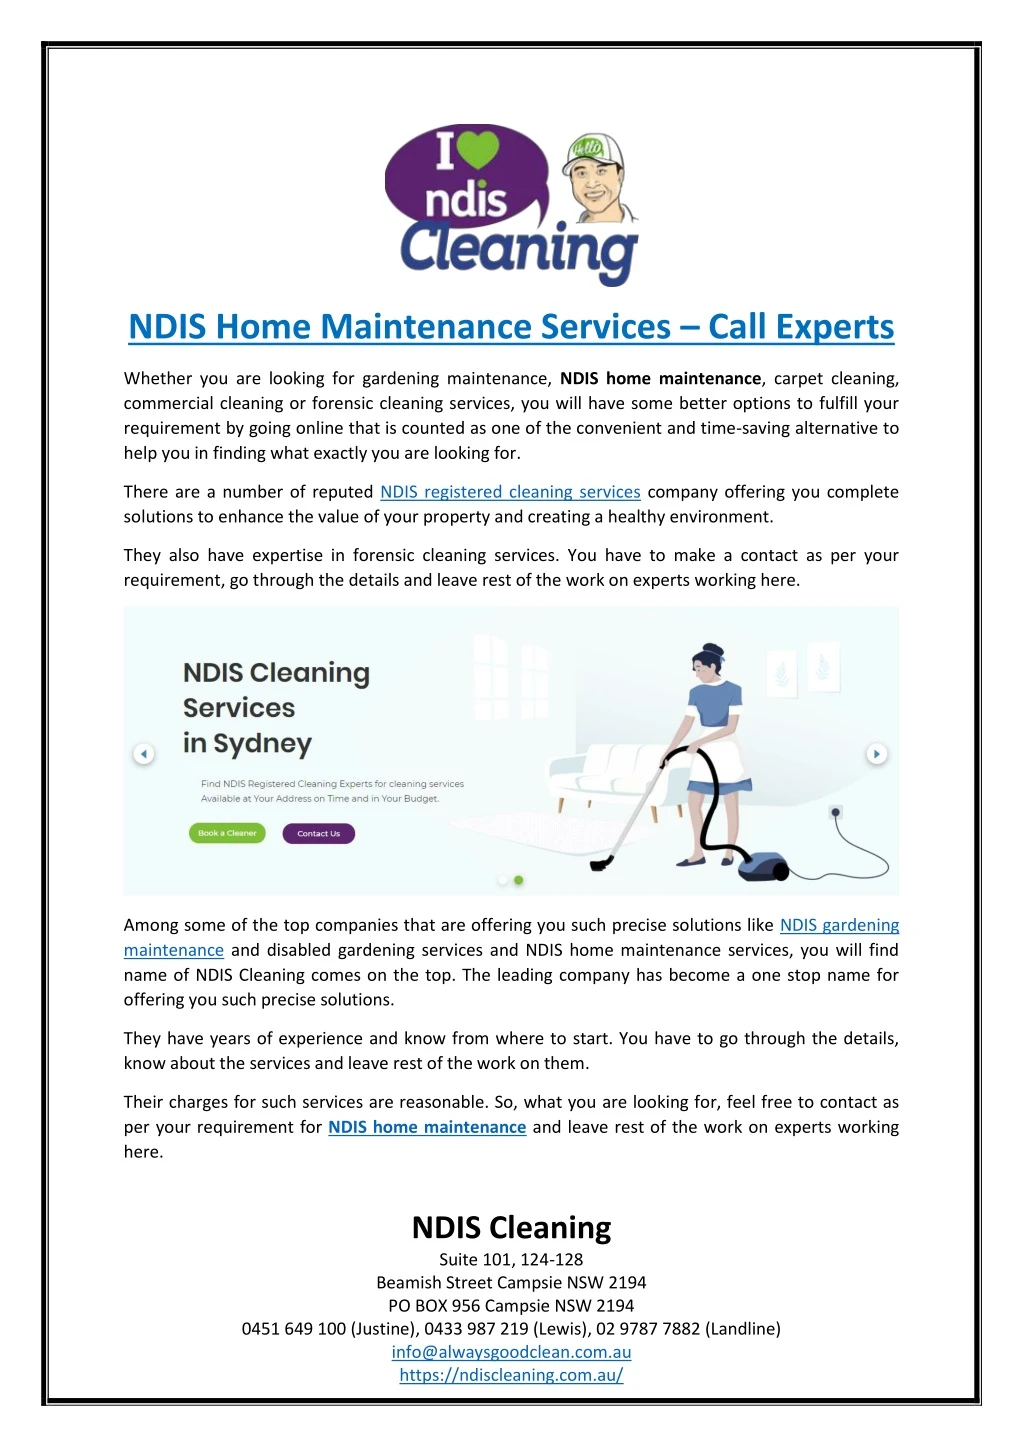 ndis home maintenance services call experts